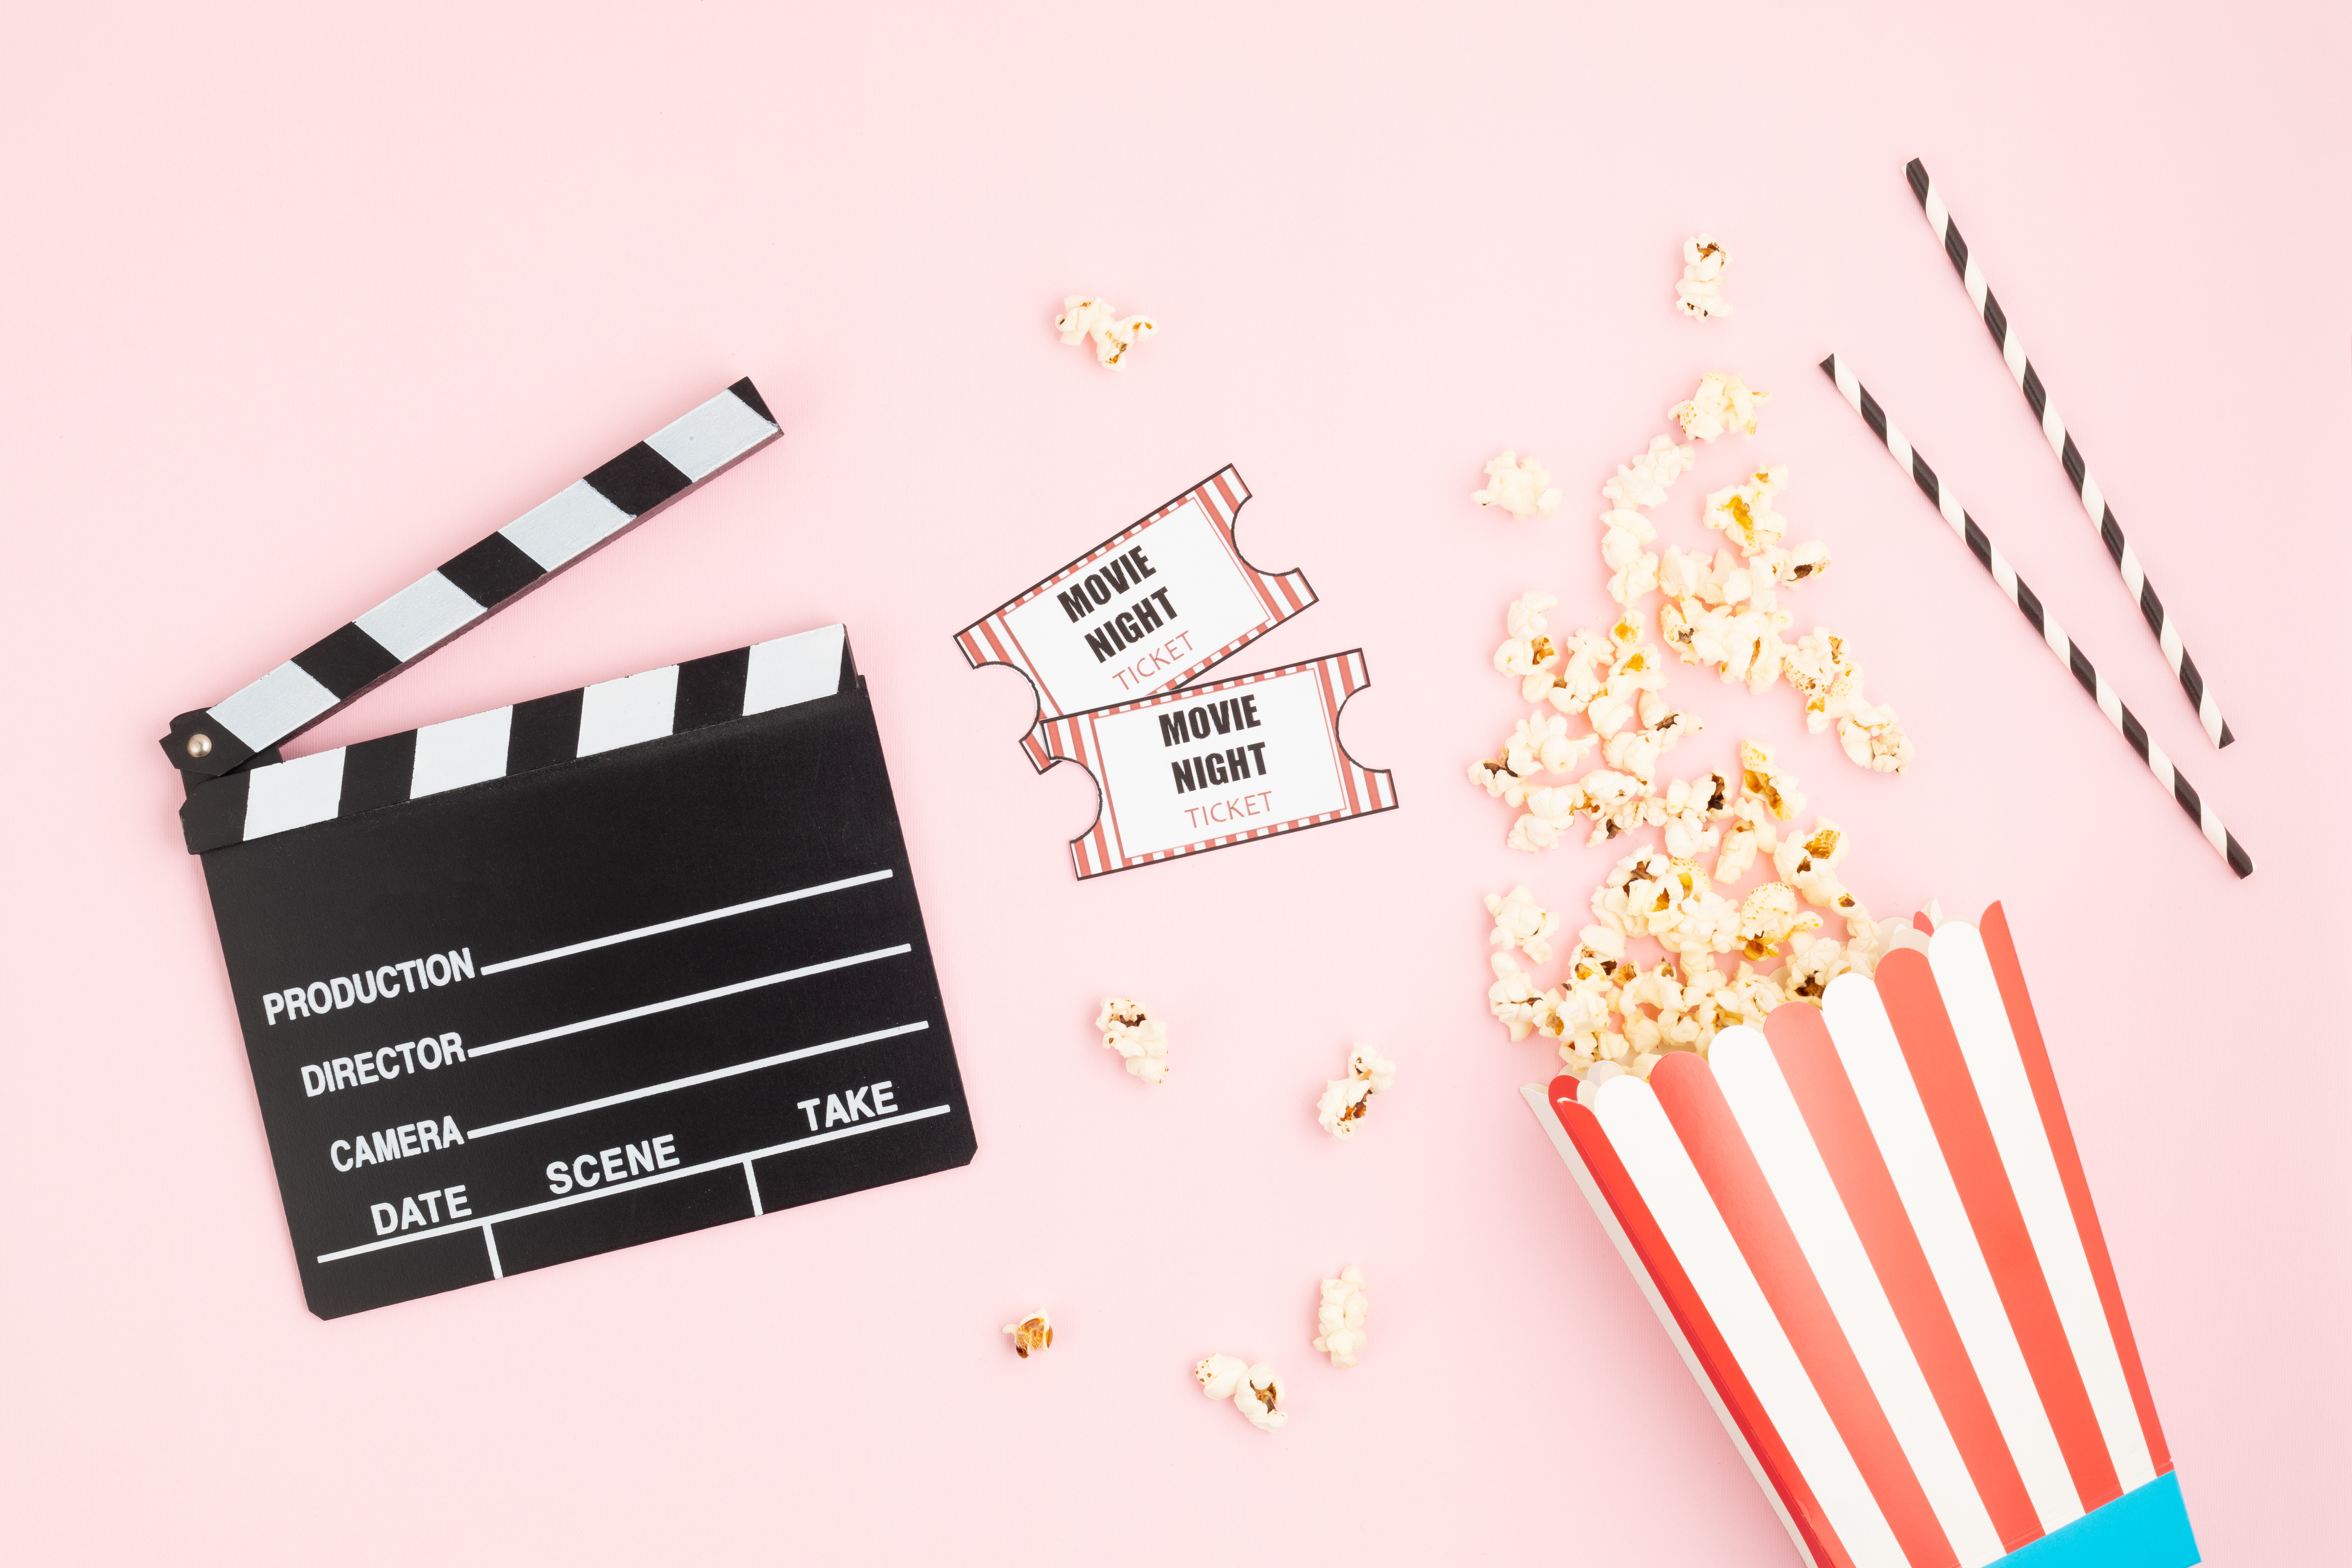 Movie clapboard, popcorn, and tickets